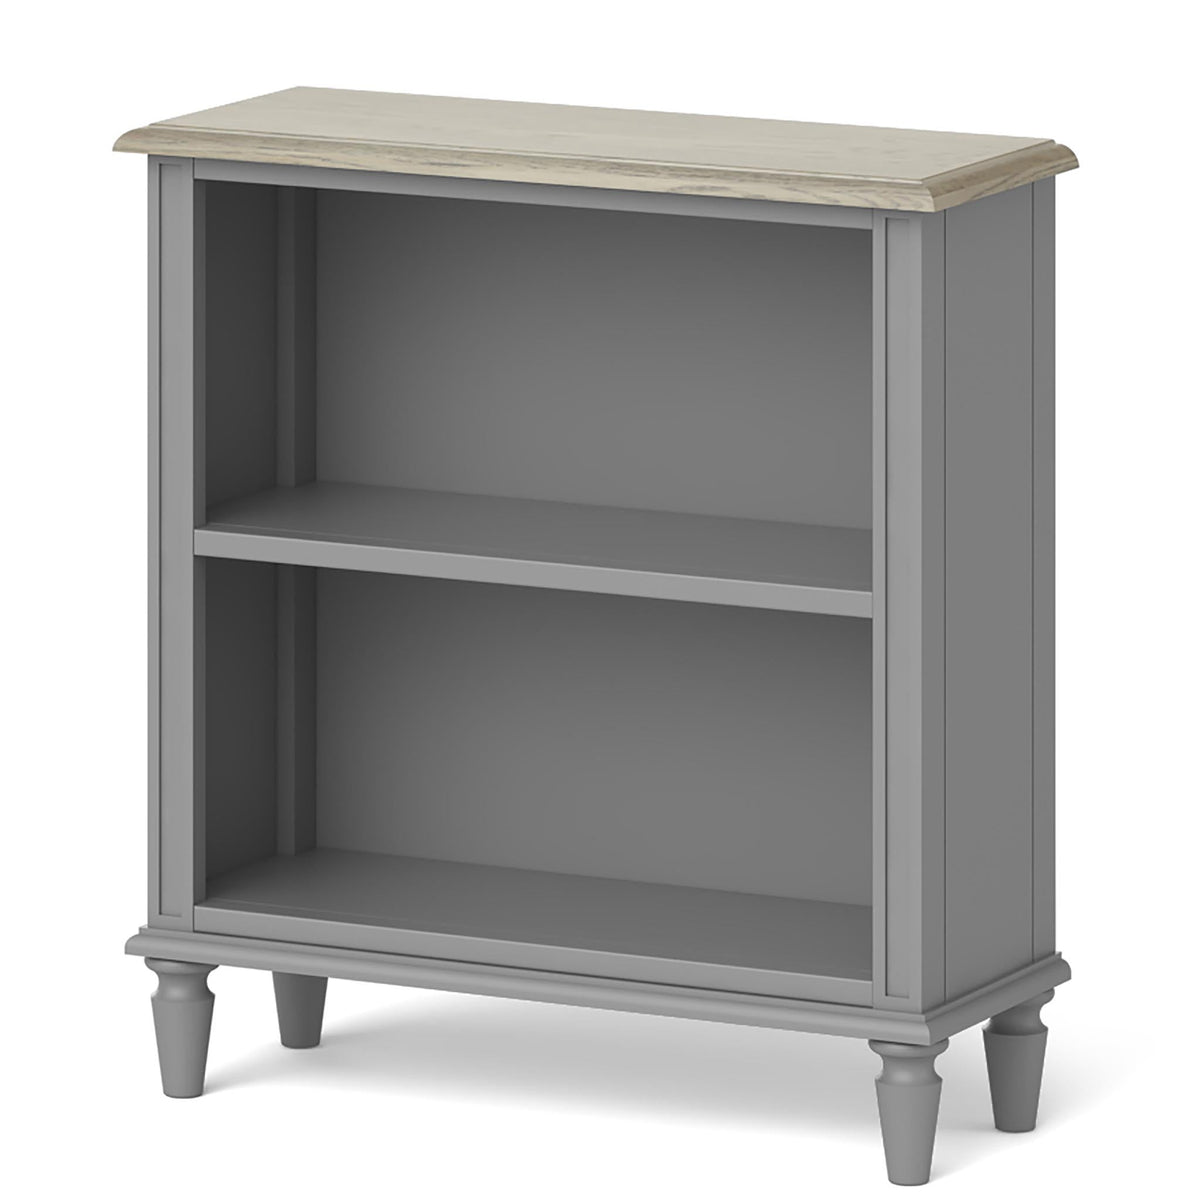 The Mulsanne Grey Small Low Bookcase  